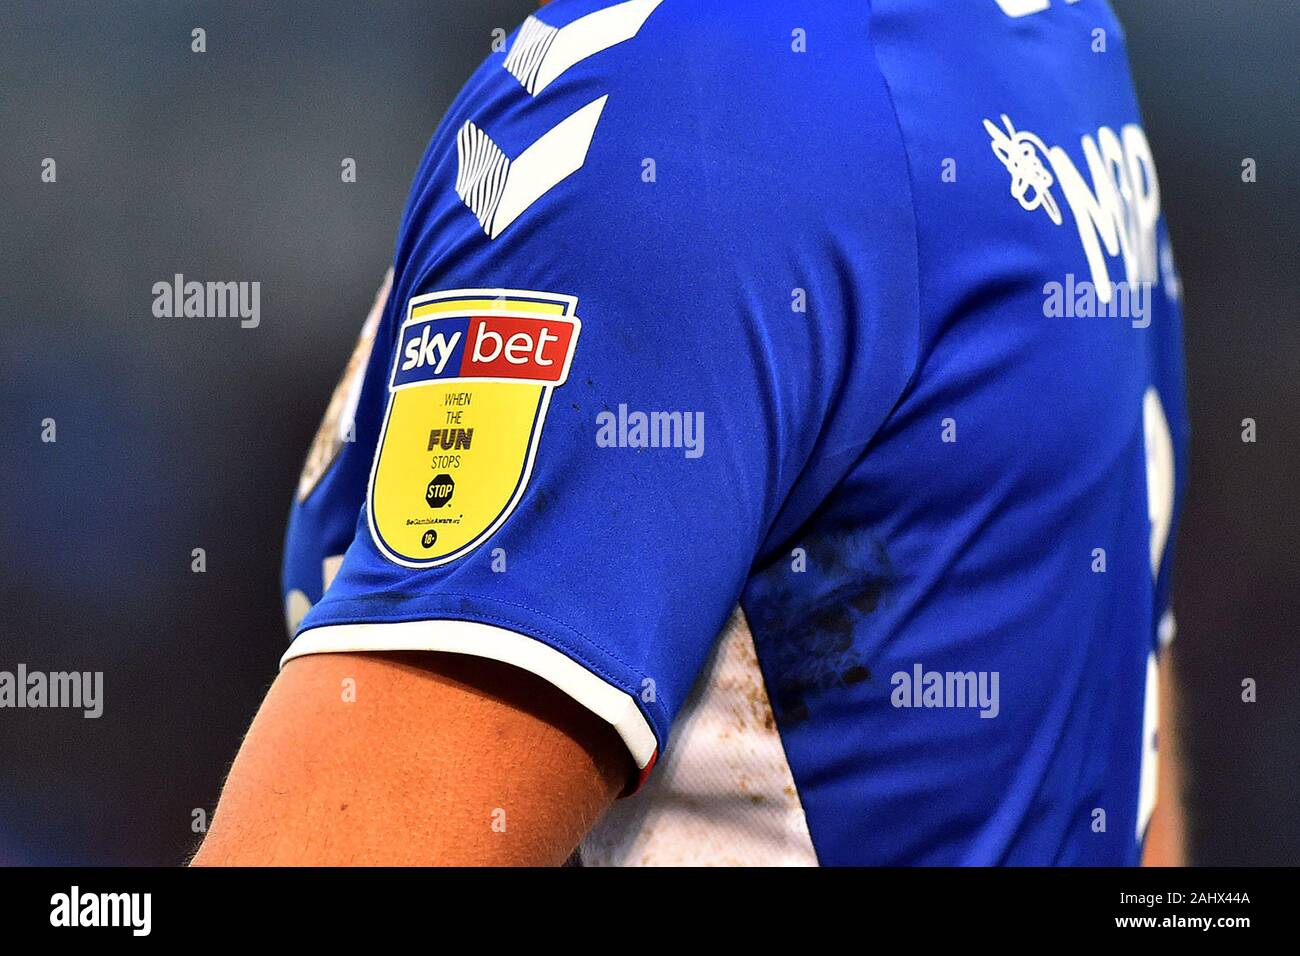 Oldham, UK. 01st Jan, 2020. OLDHAM, ENGLAND - JANUARY 1ST EFL shirt patch during the Sky Bet League 2 match between Oldham Athletic and Scunthorpe United at Boundary Park, Oldham on Wednesday 1st January 2020. (Credit: Eddie Garvey | MI News) Photograph may only be used for newspaper and/or magazine editorial purposes, license required for commercial use Credit: MI News & Sport /Alamy Live News Stock Photo